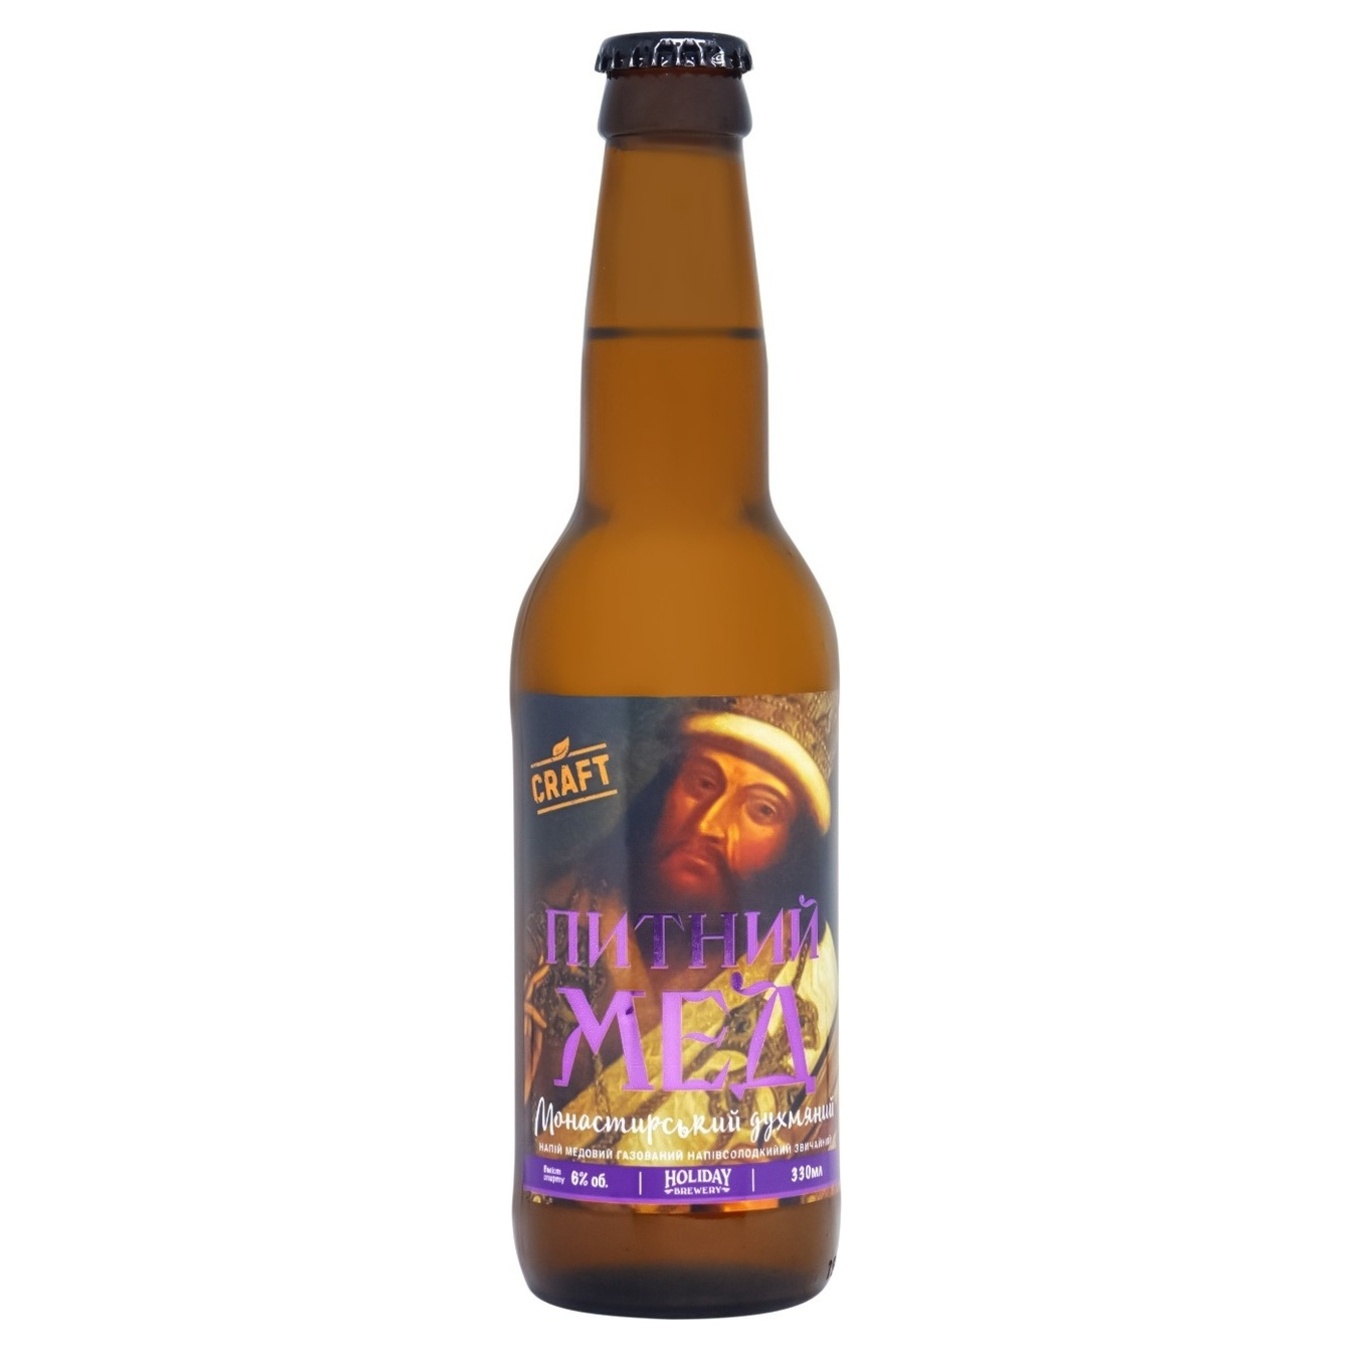 Drink Friday Brewery Honey Monastyrsky drinkable low-alcohol semi-sweet 6% 0.33l glass bottle